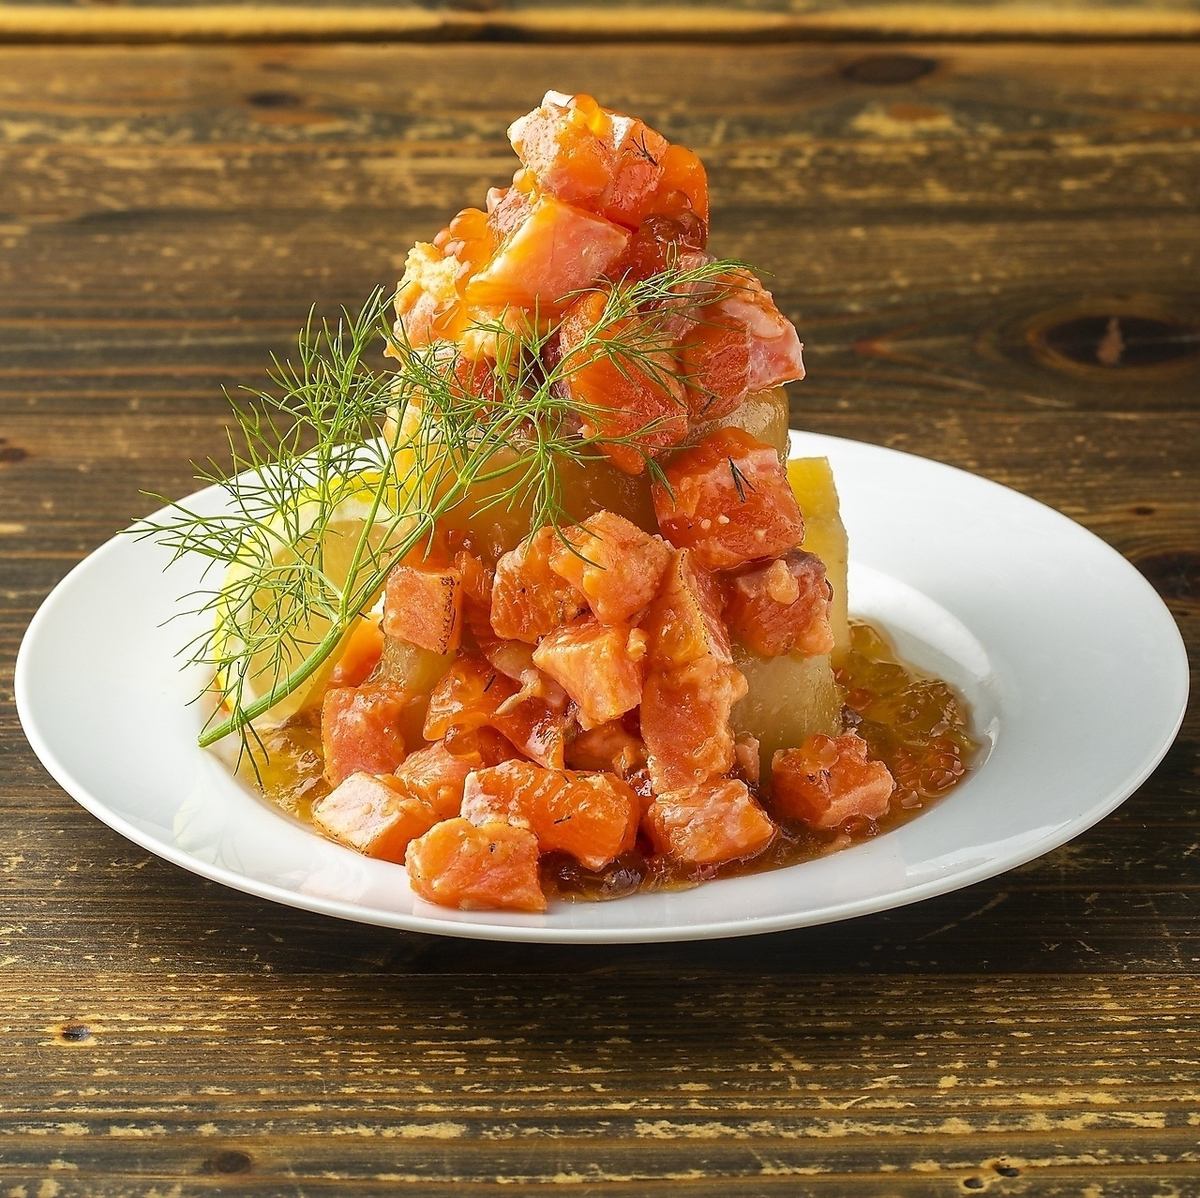 There is also a full seafood menu, such as raw salmon carpaccio.